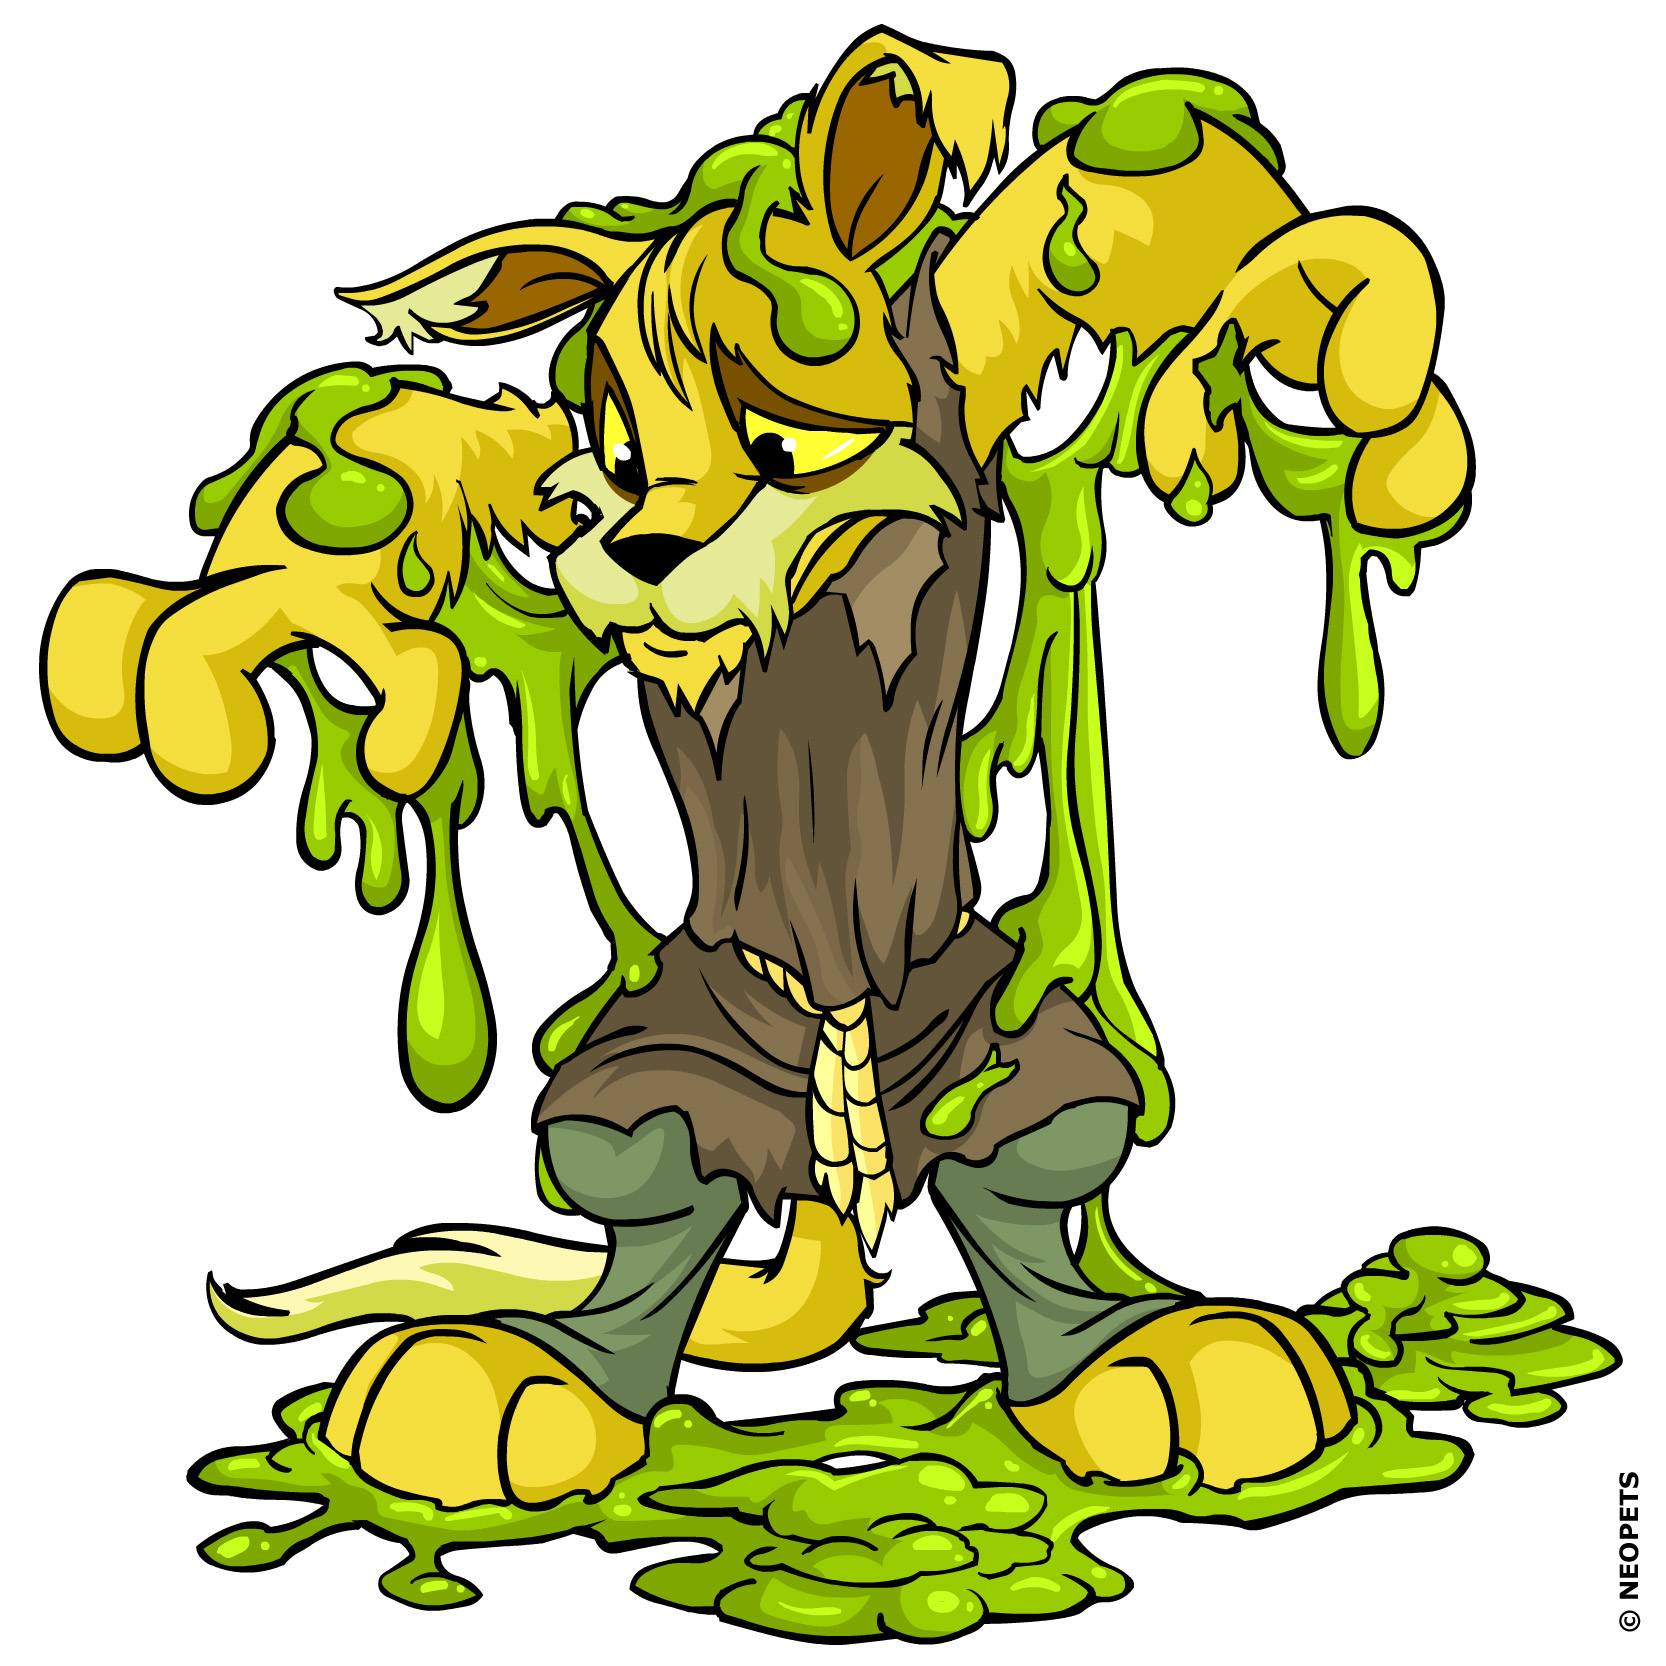 https://images.neopets.com/press/lupe_4.jpg